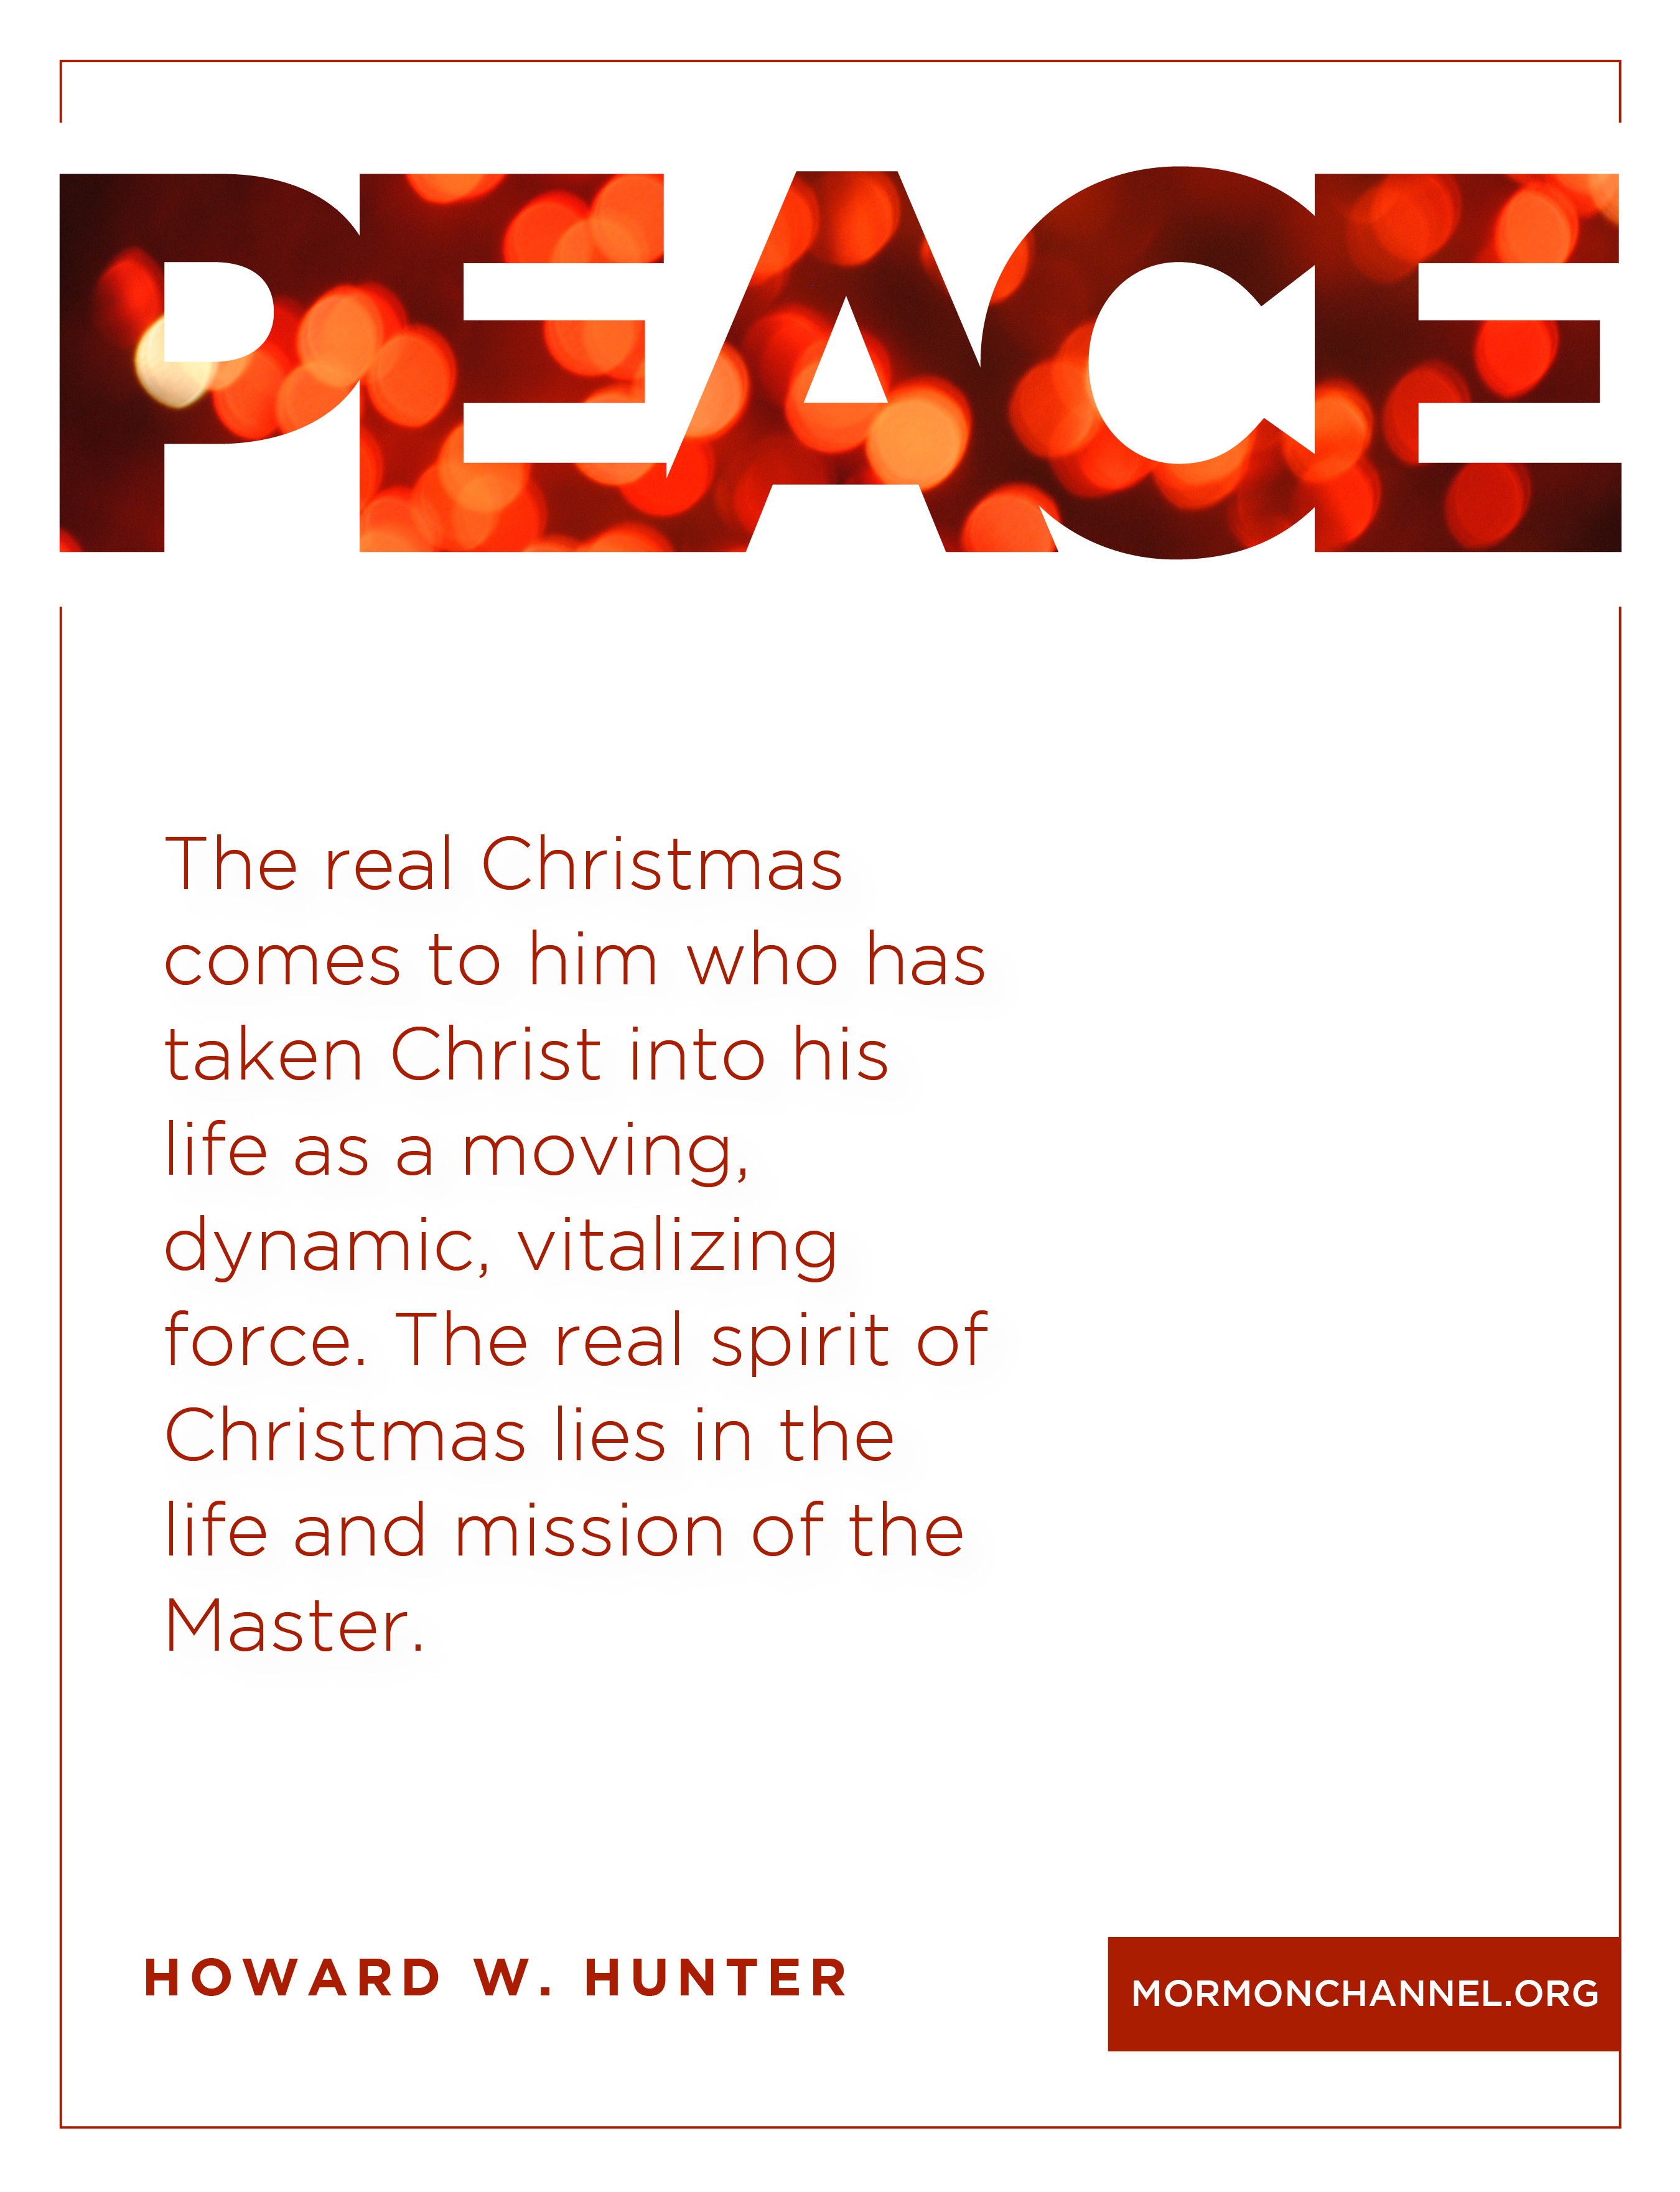 A simple white graphic with a quote by President Howard W. Hunter in red: “The real spirit of Christmas lies in the … mission of the Master.”